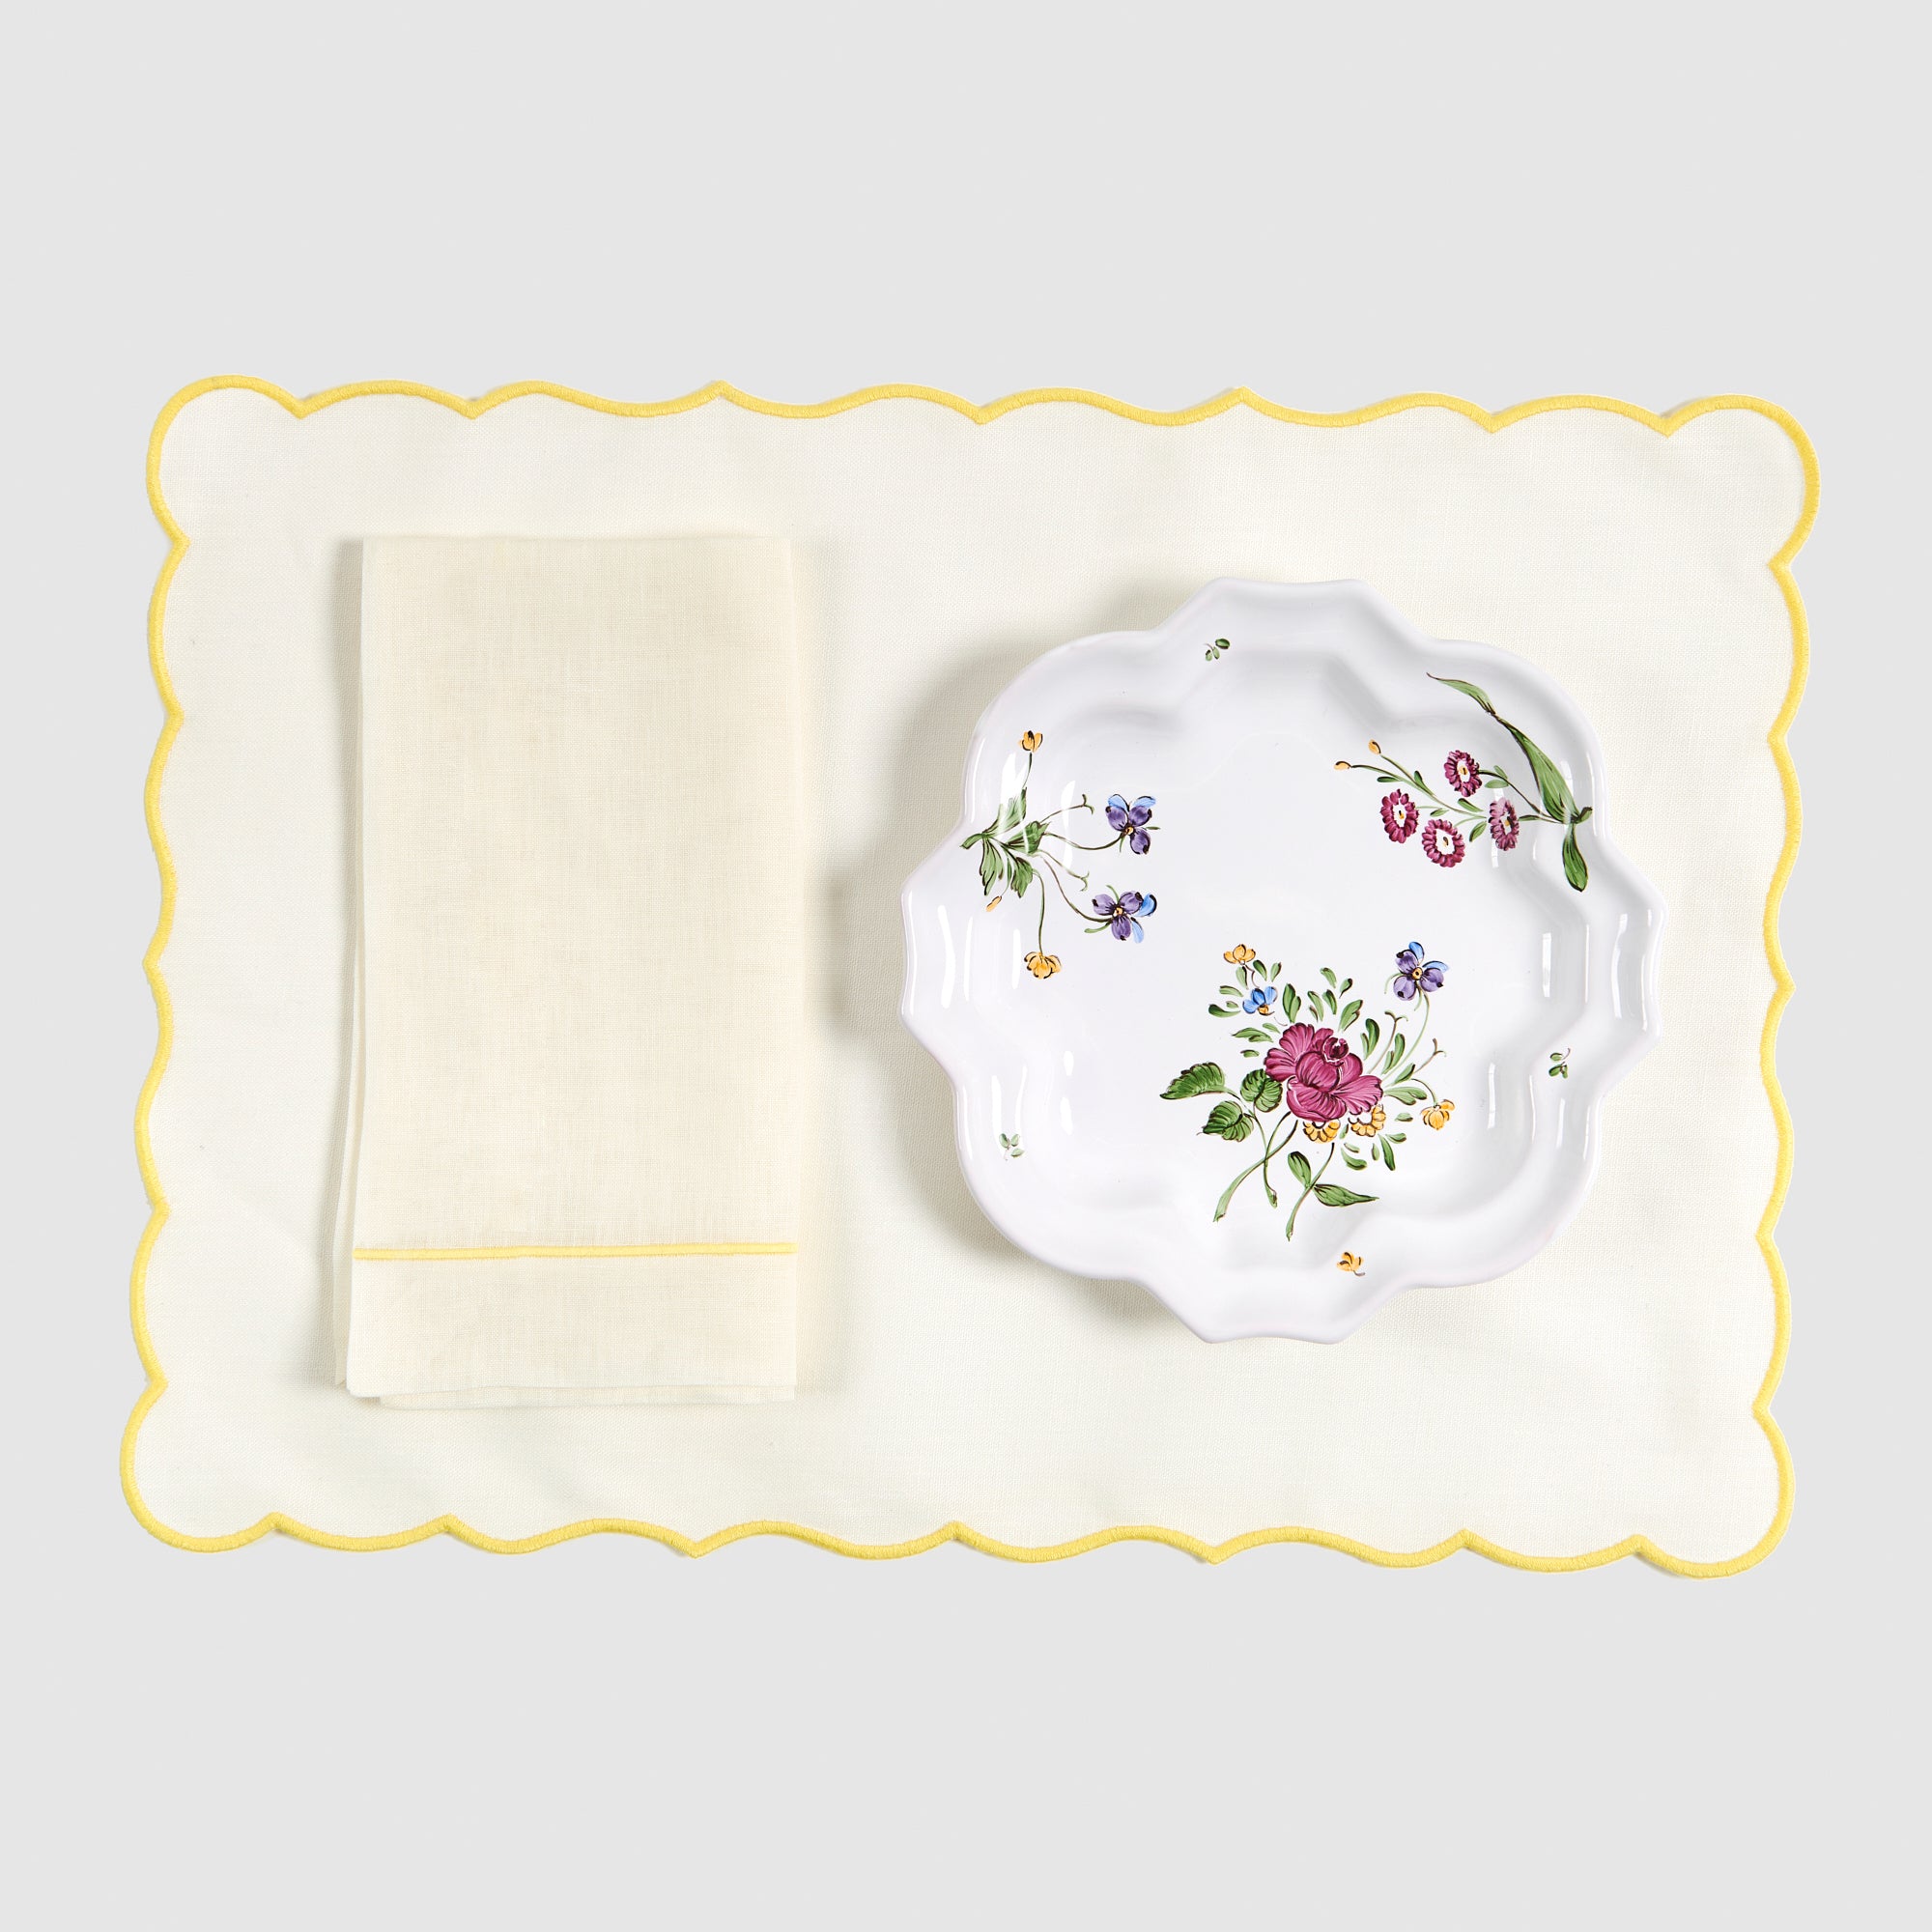 Rectangular Placemat and Napkin Ivory, Yellow and Picardie Drageoir